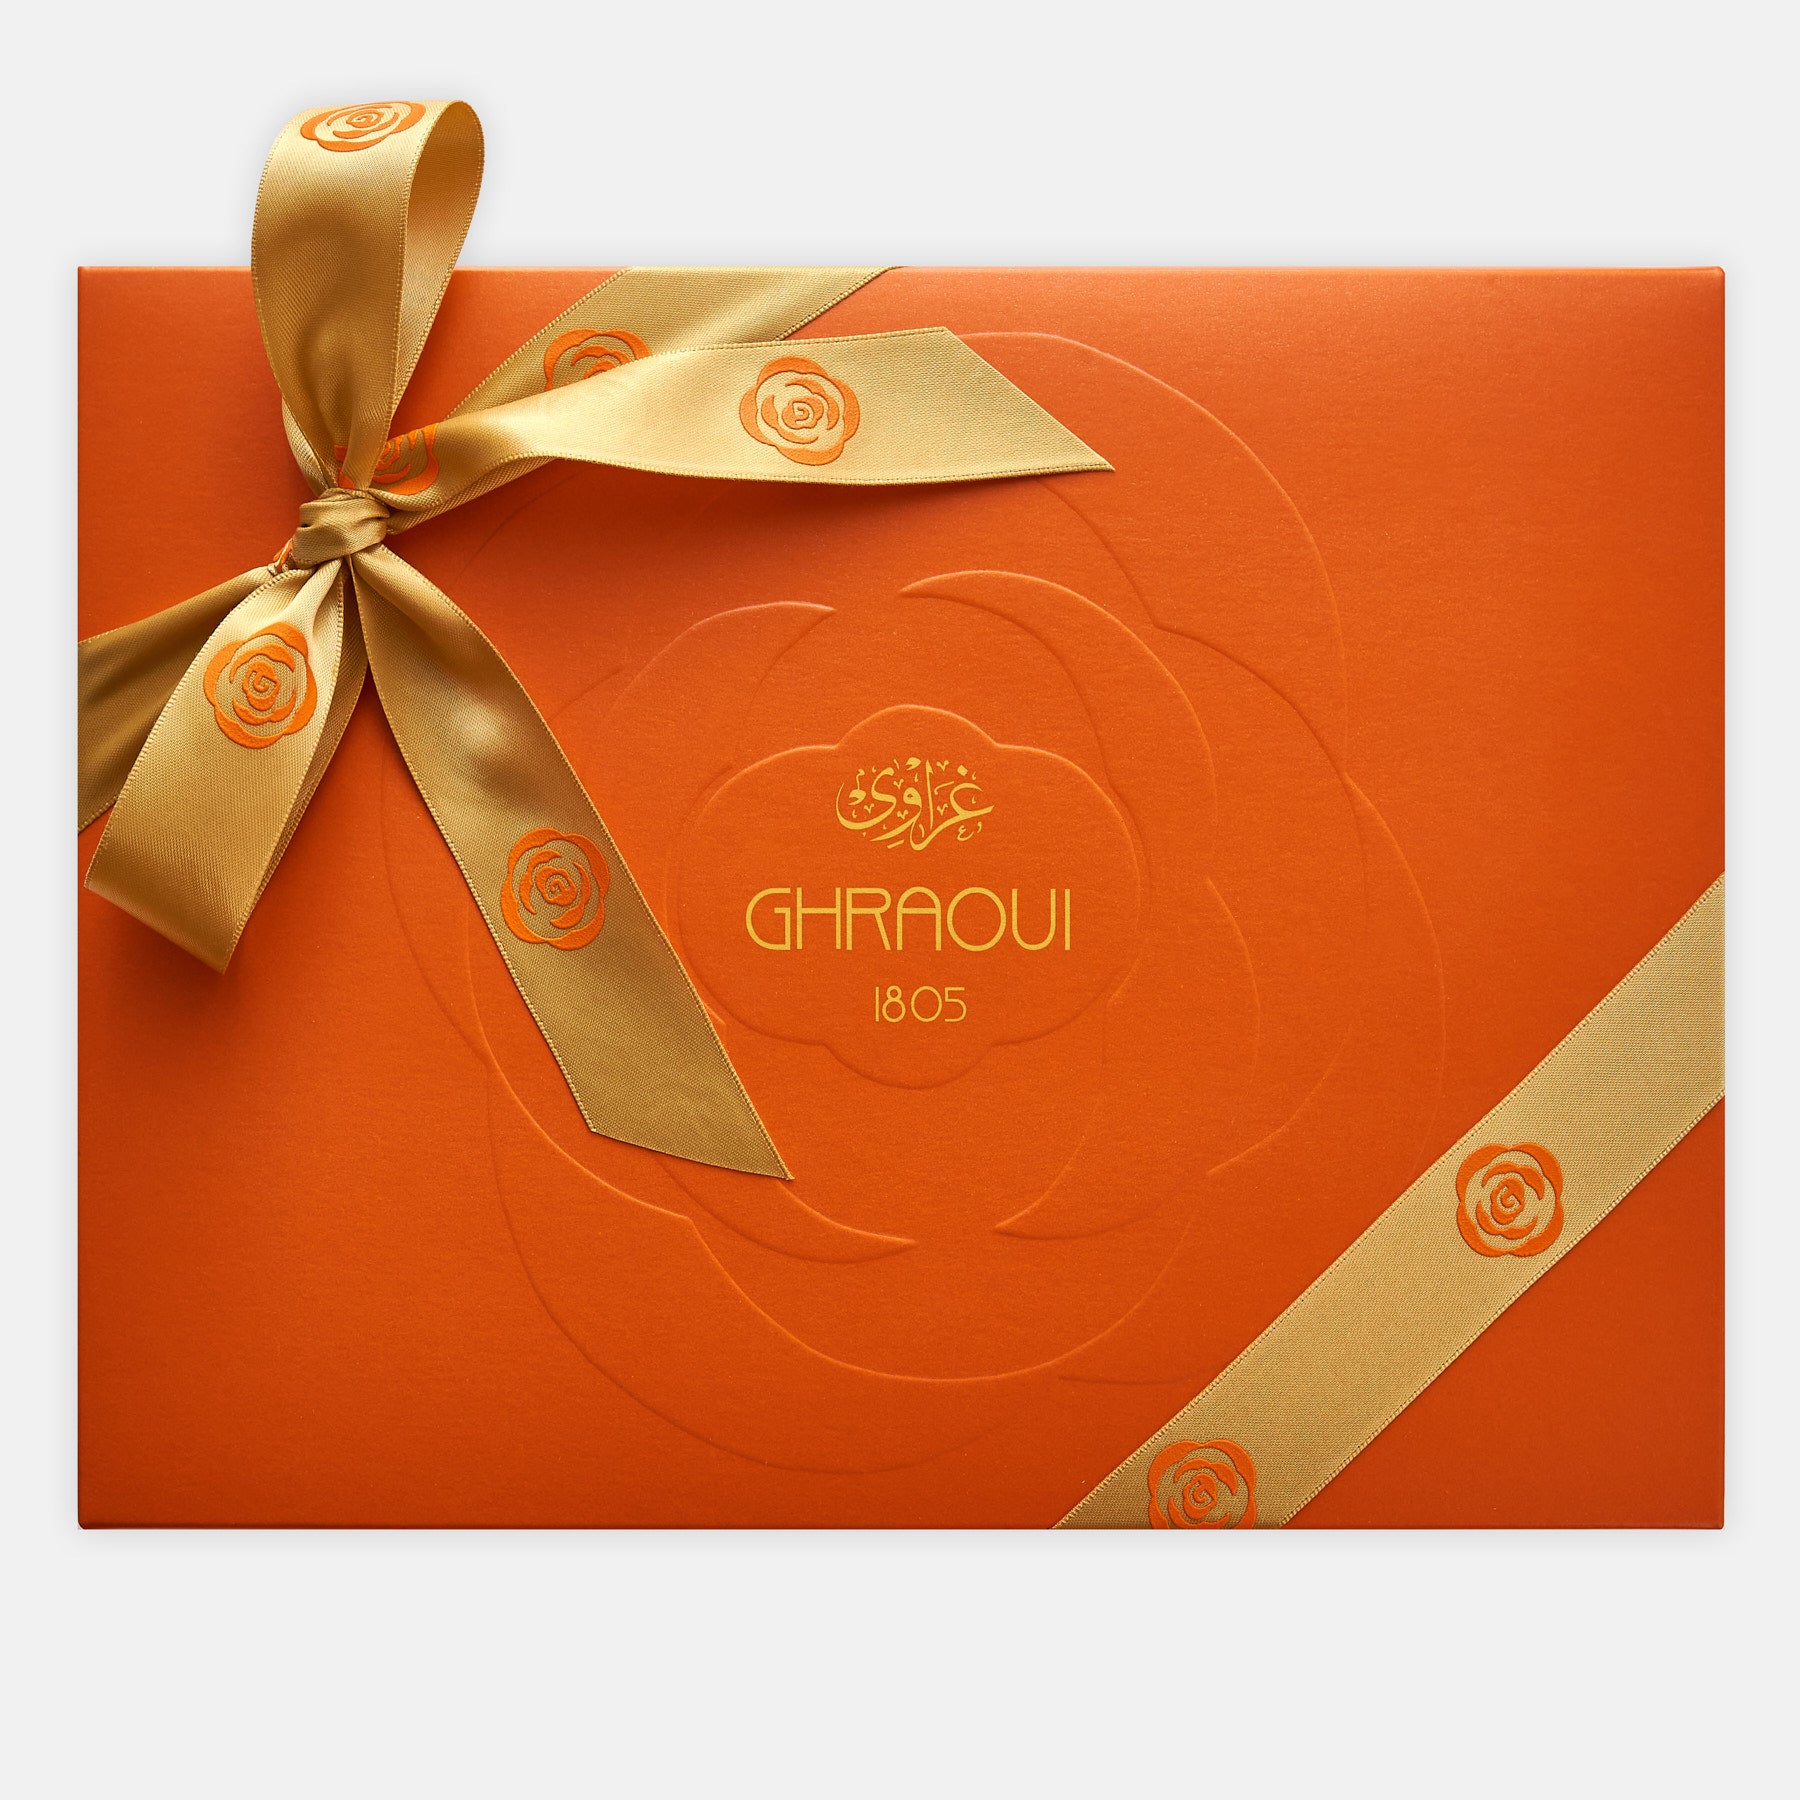 Closed box of candied apricots